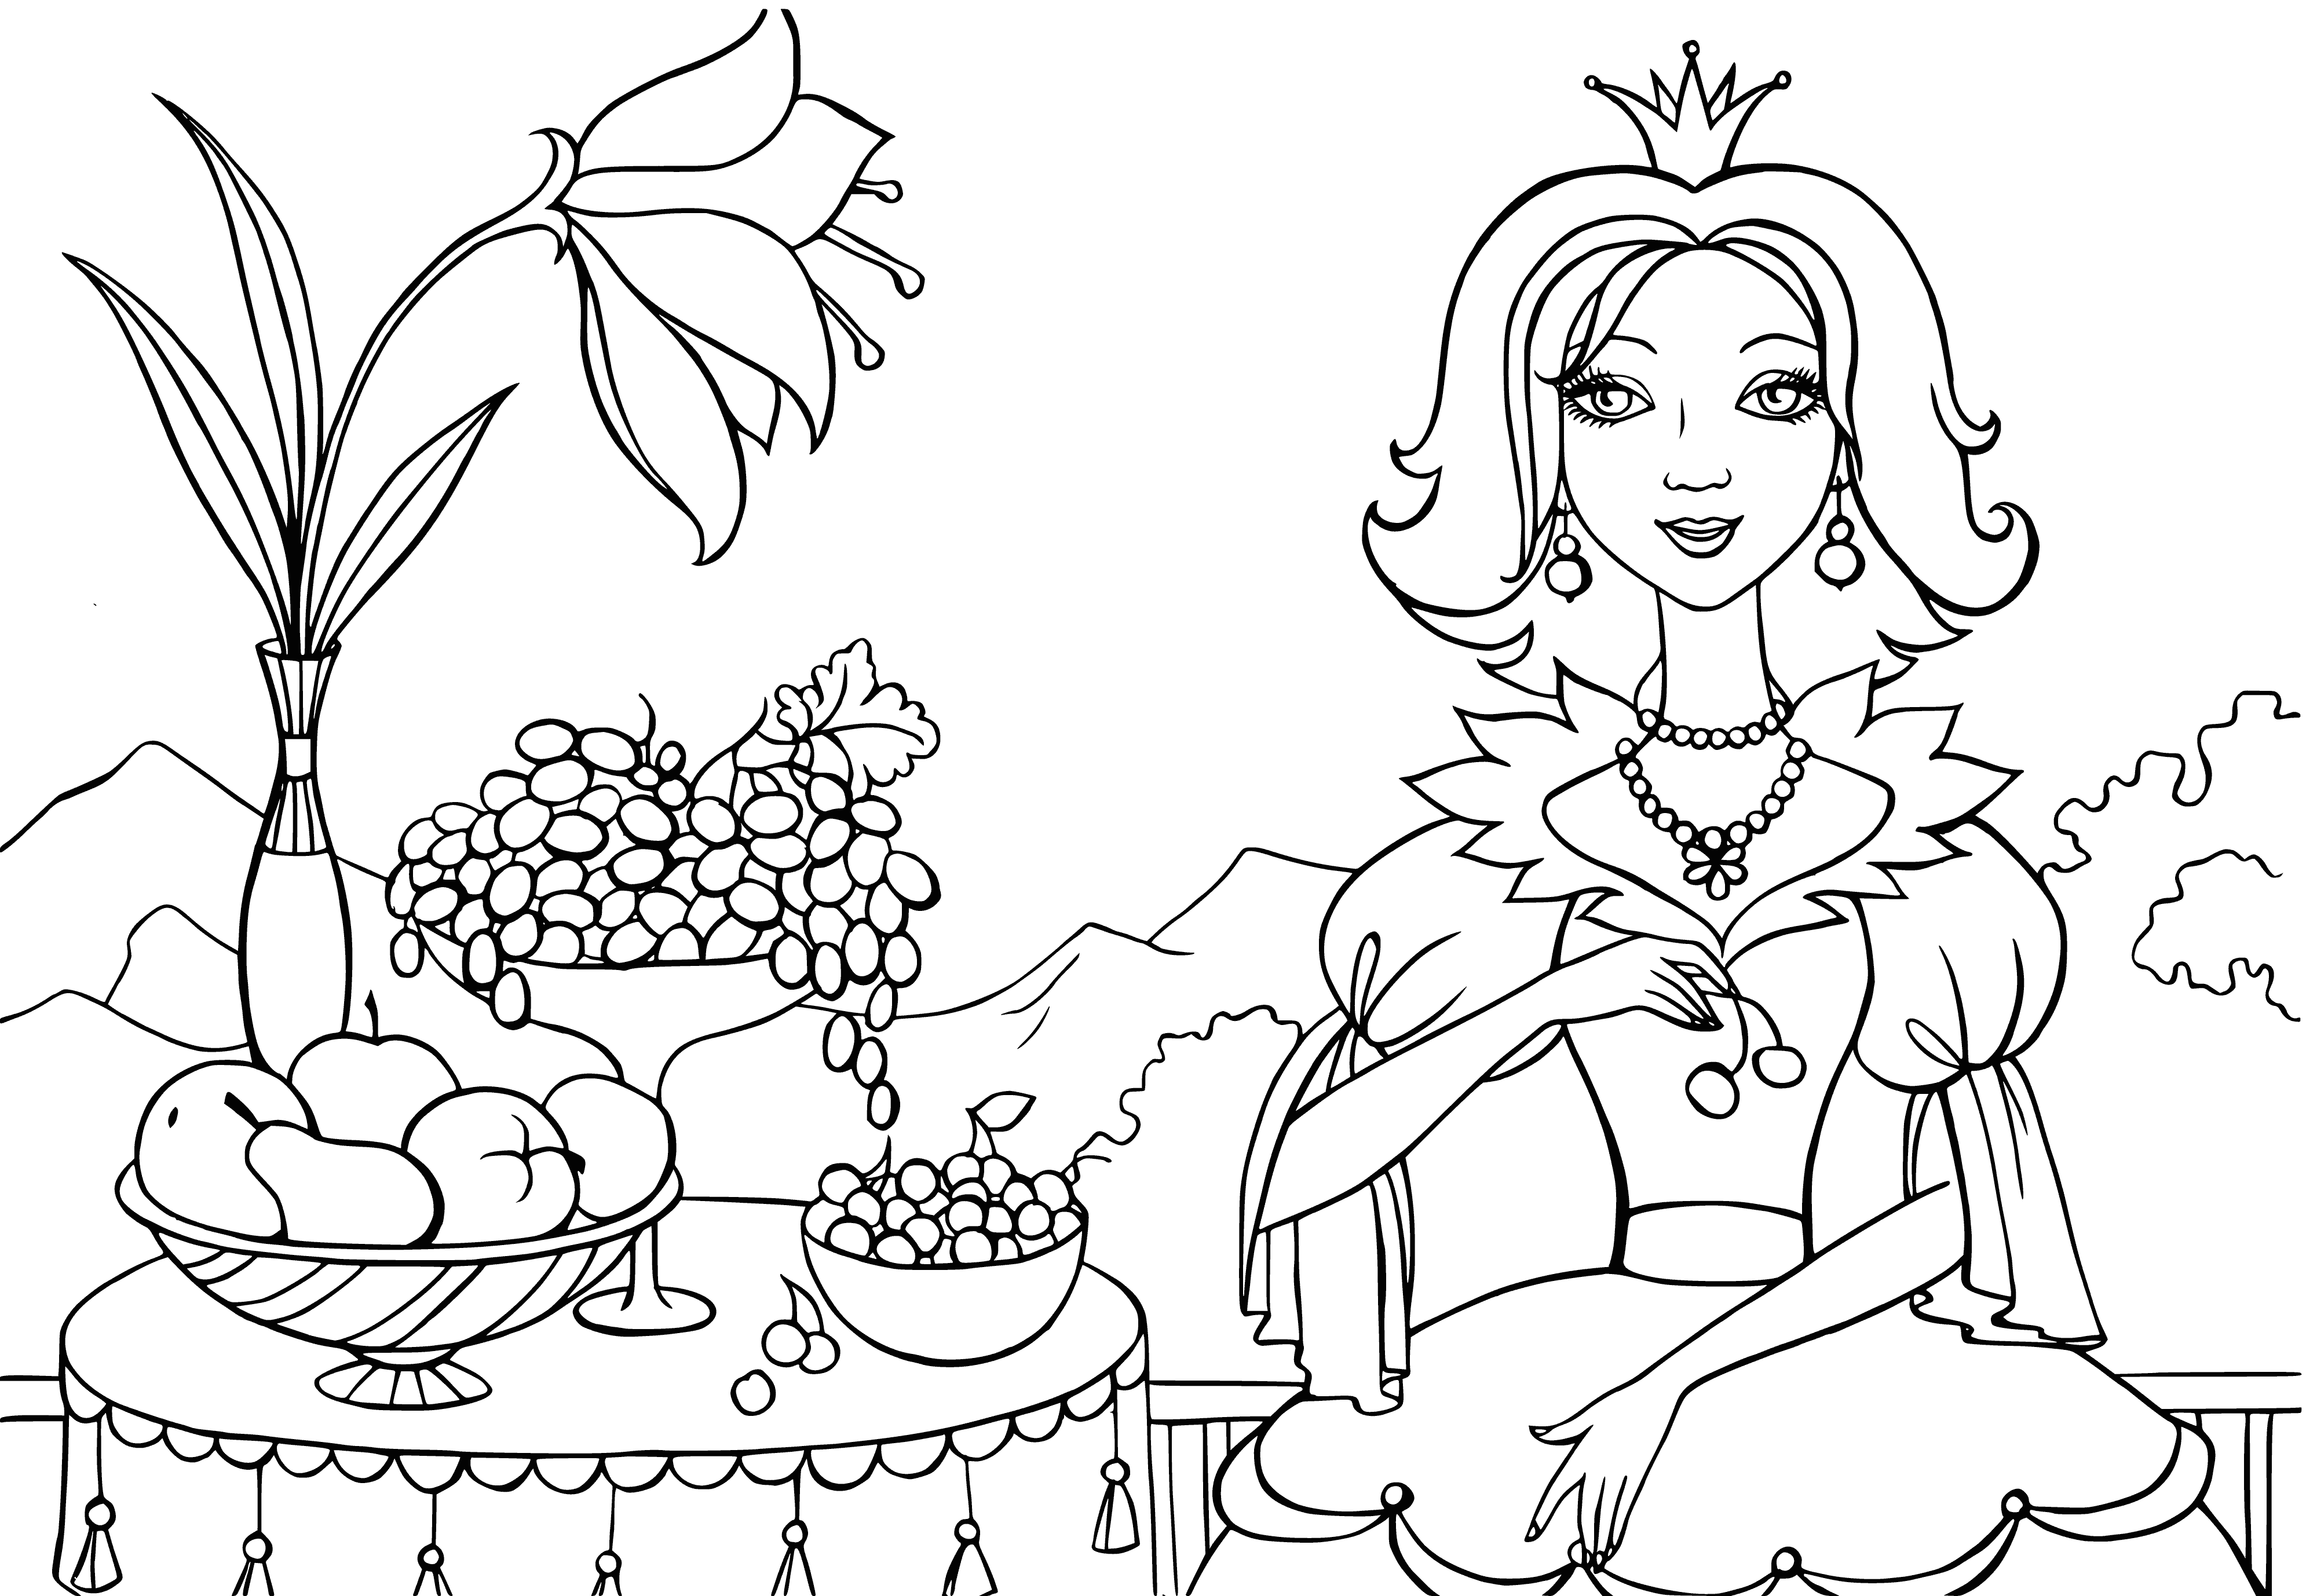 coloring page: Princess enjoys breakfast of a piece of toast, boiled egg, slice of ham, a ripe strawberry & cup of tea.